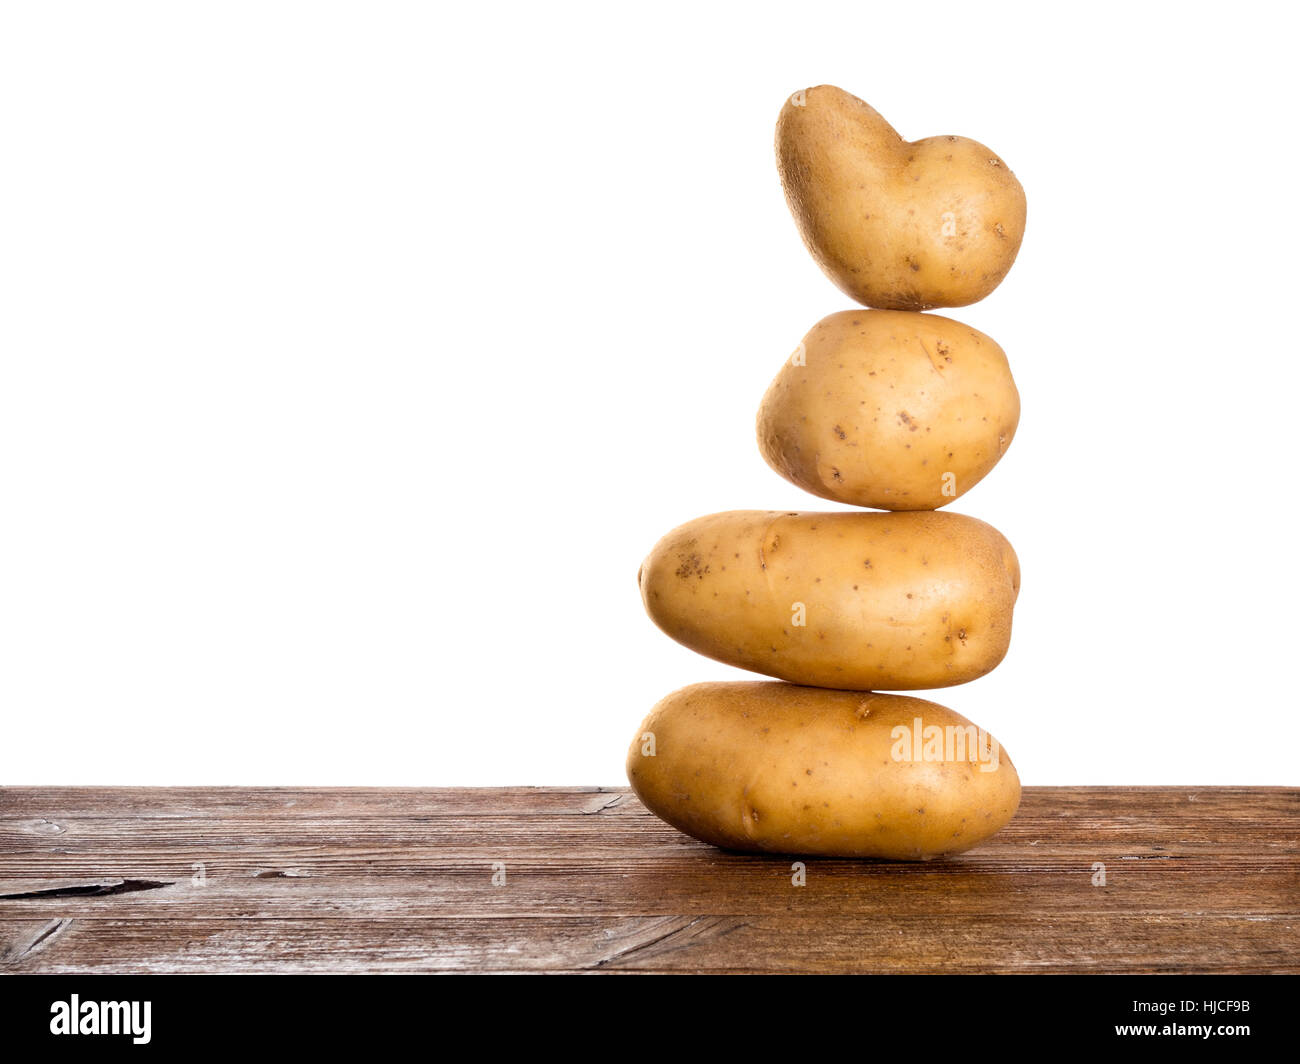 Zen style potato tower. Balanced diet! Baking, cooking etc. On rustic work surface.Isolated against white behind. Stock Photo